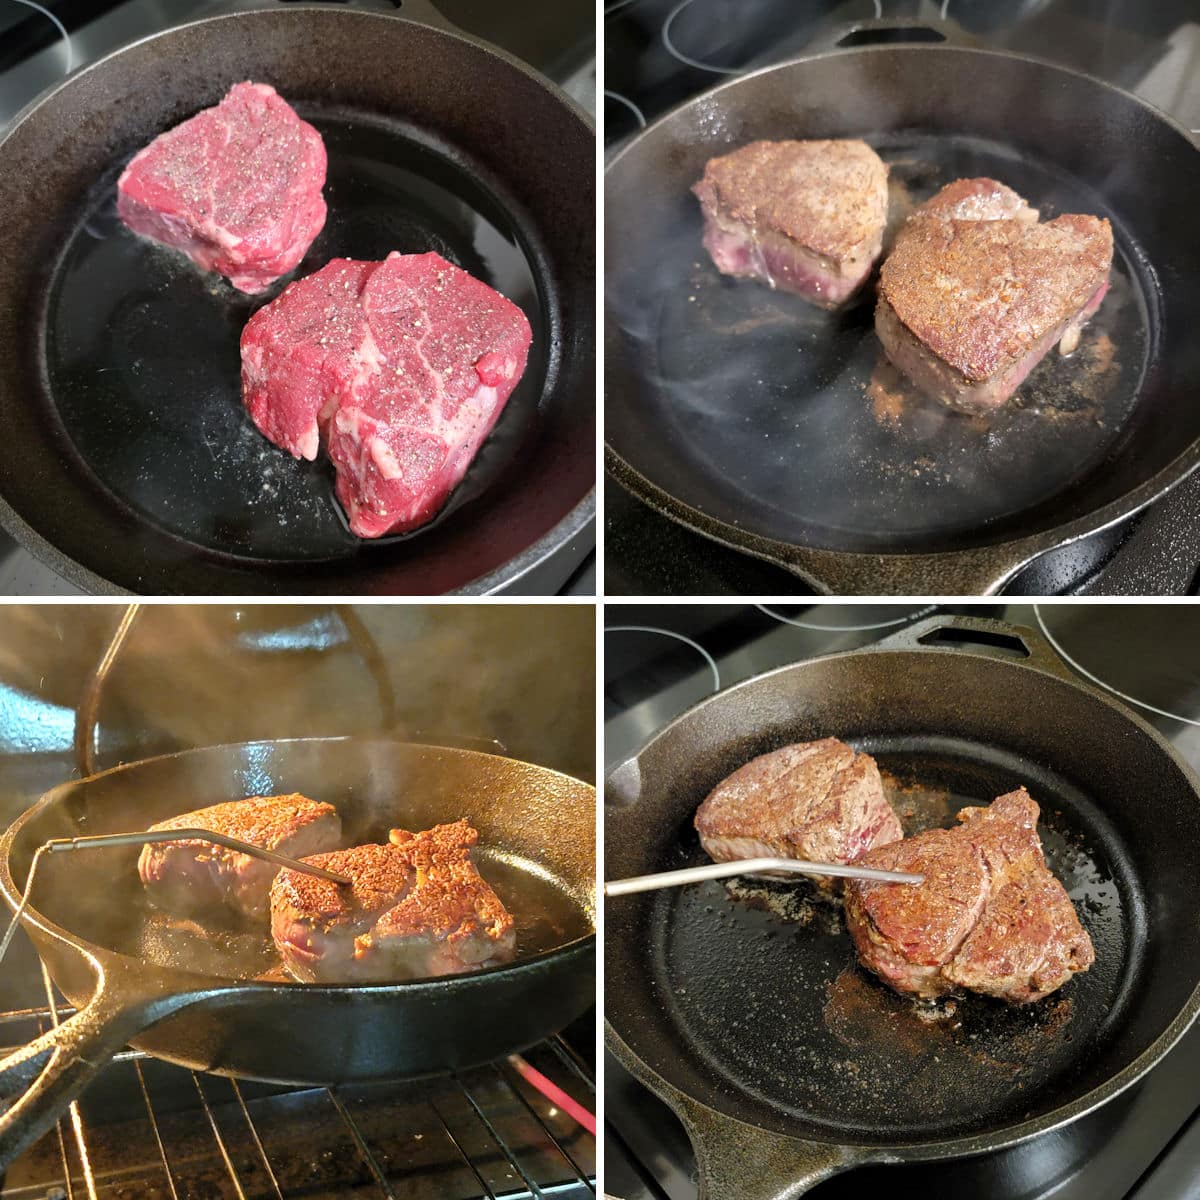 Cooking filet mignon steaks in a cast iron pan.